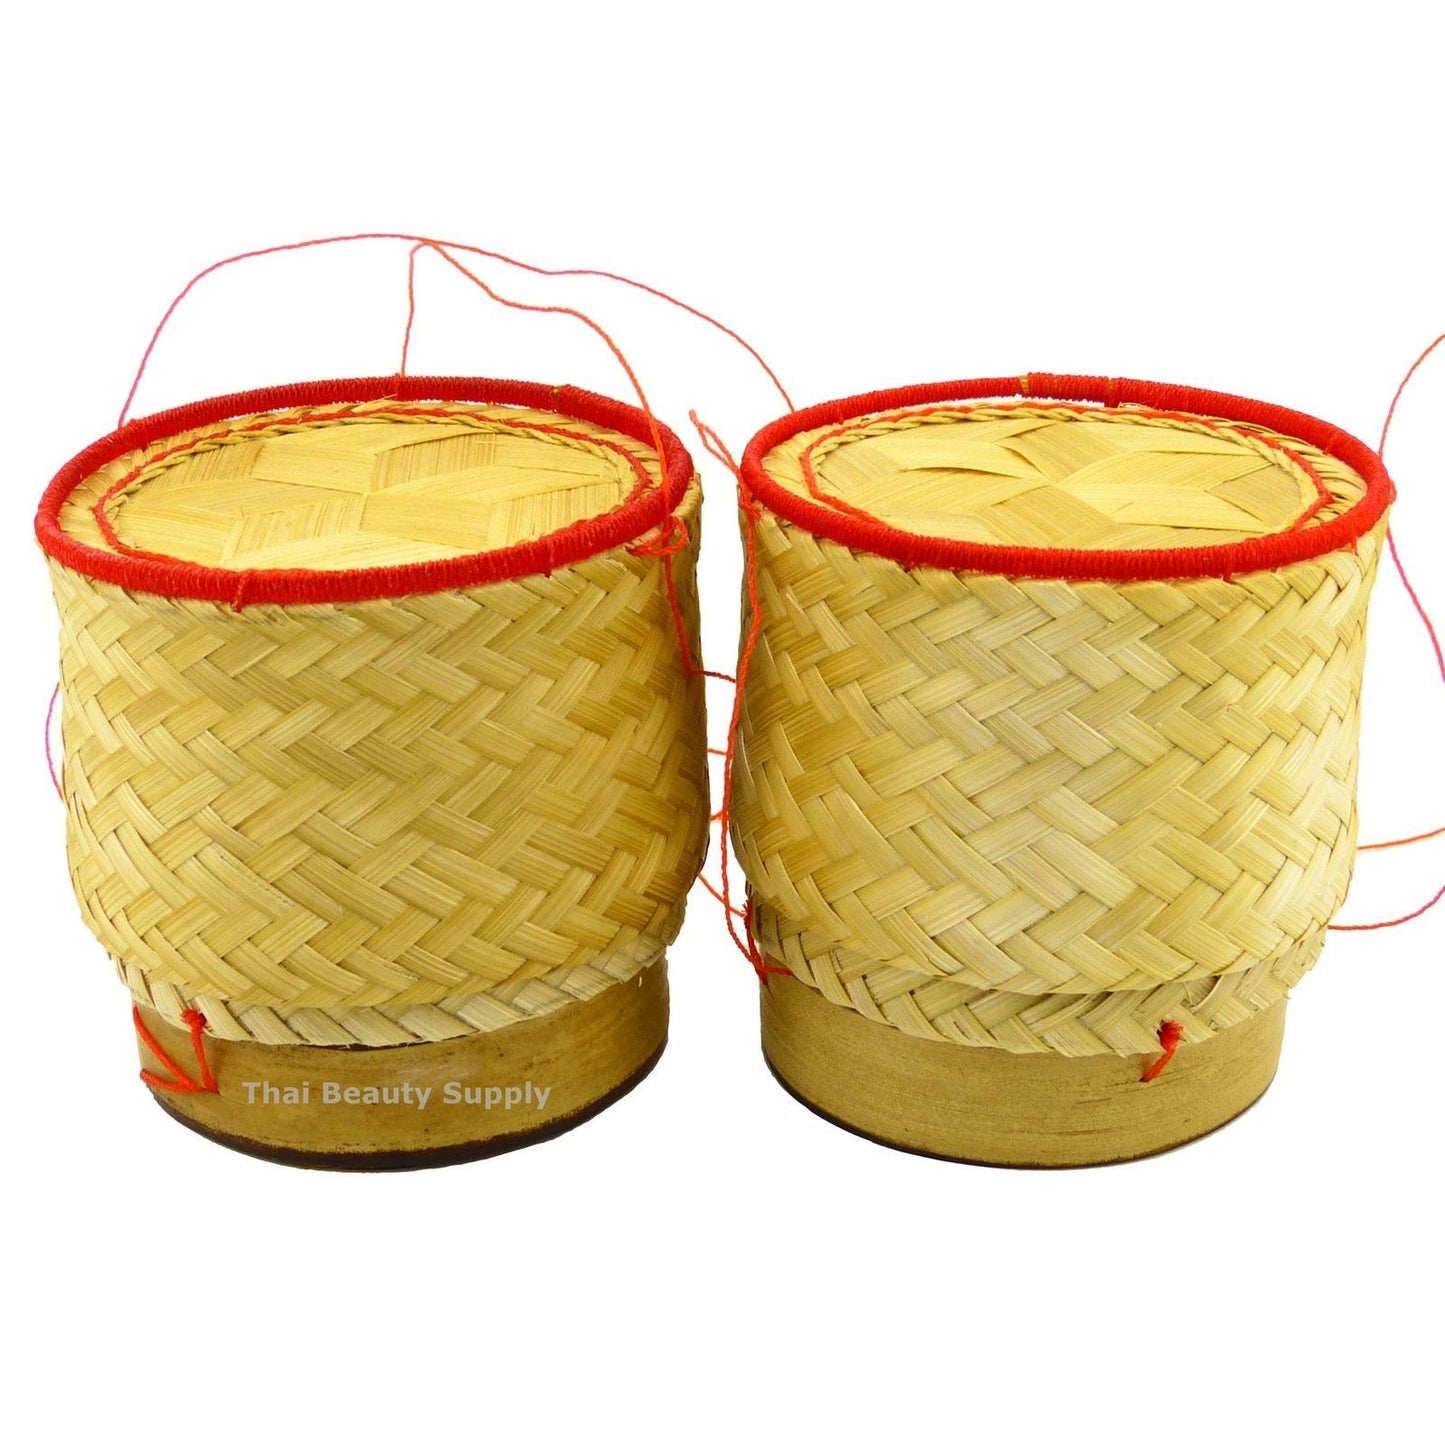 Aluminum Sticky Rice Steamer Set with 2 Bamboo Serving Baskets - Asian Beauty Supply